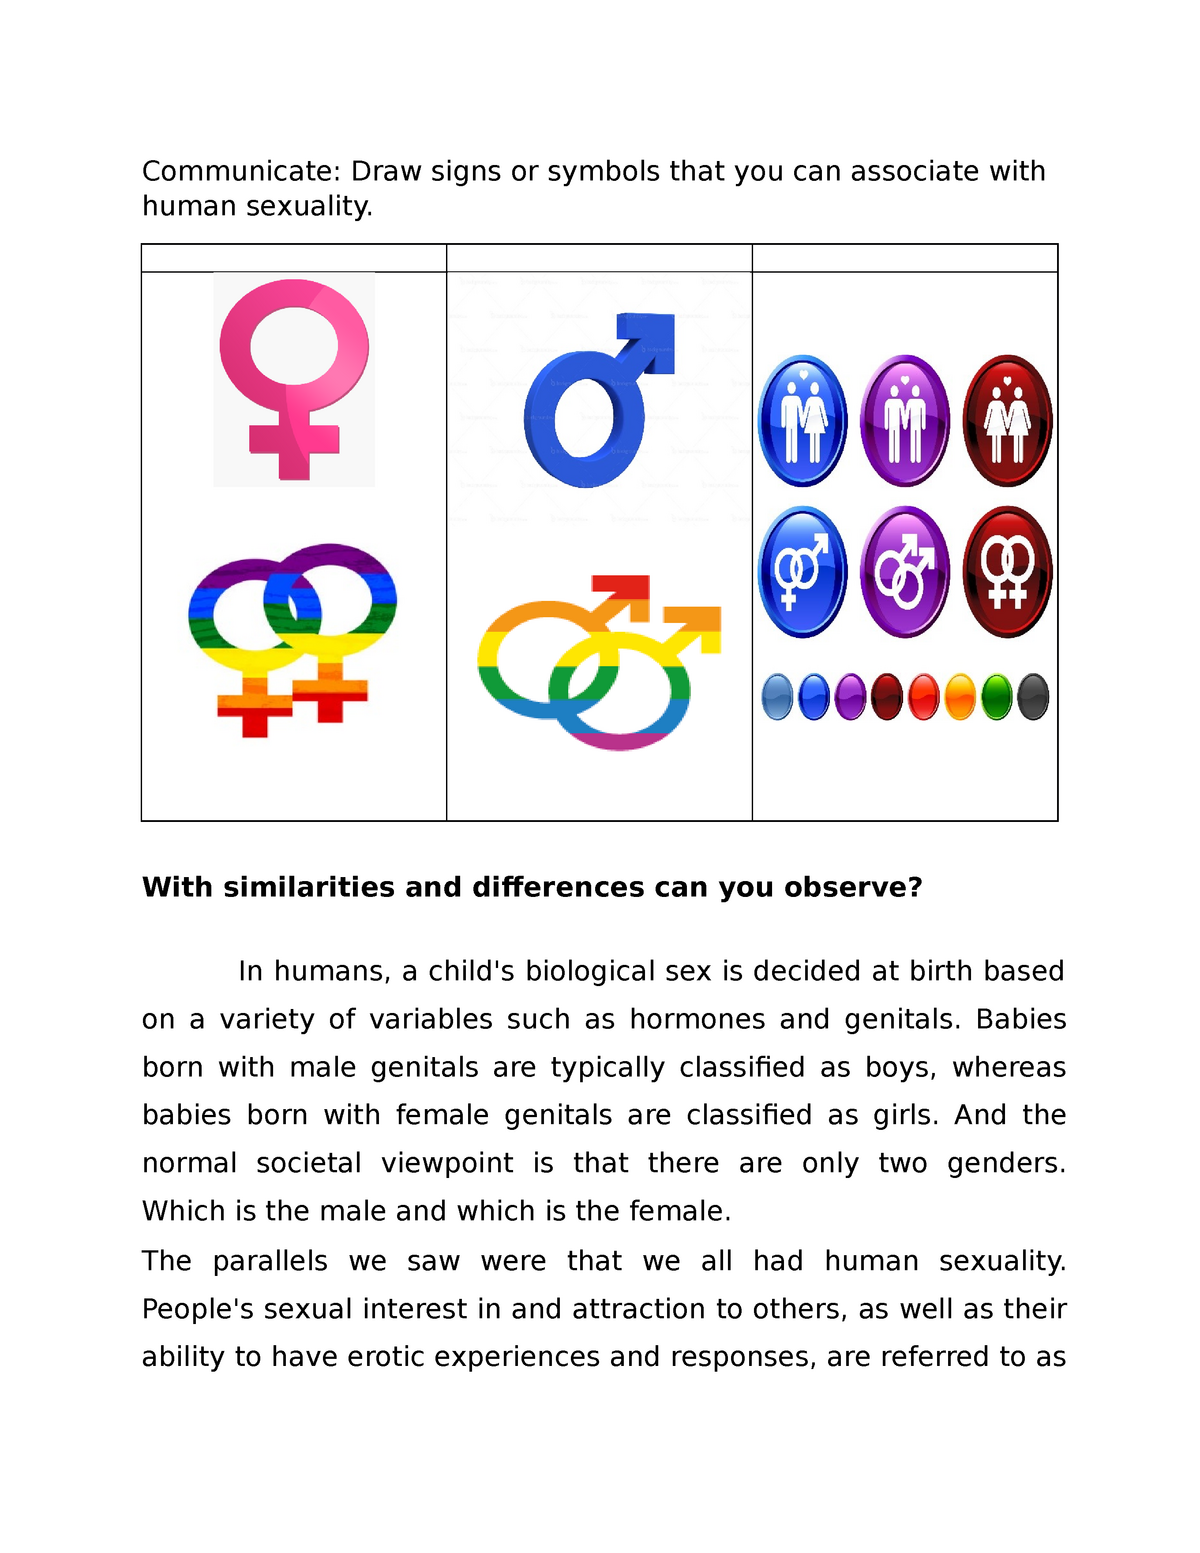 Reflection On Human Sexuality Communicate Draw Signs Or Symbols That You Can Associate With